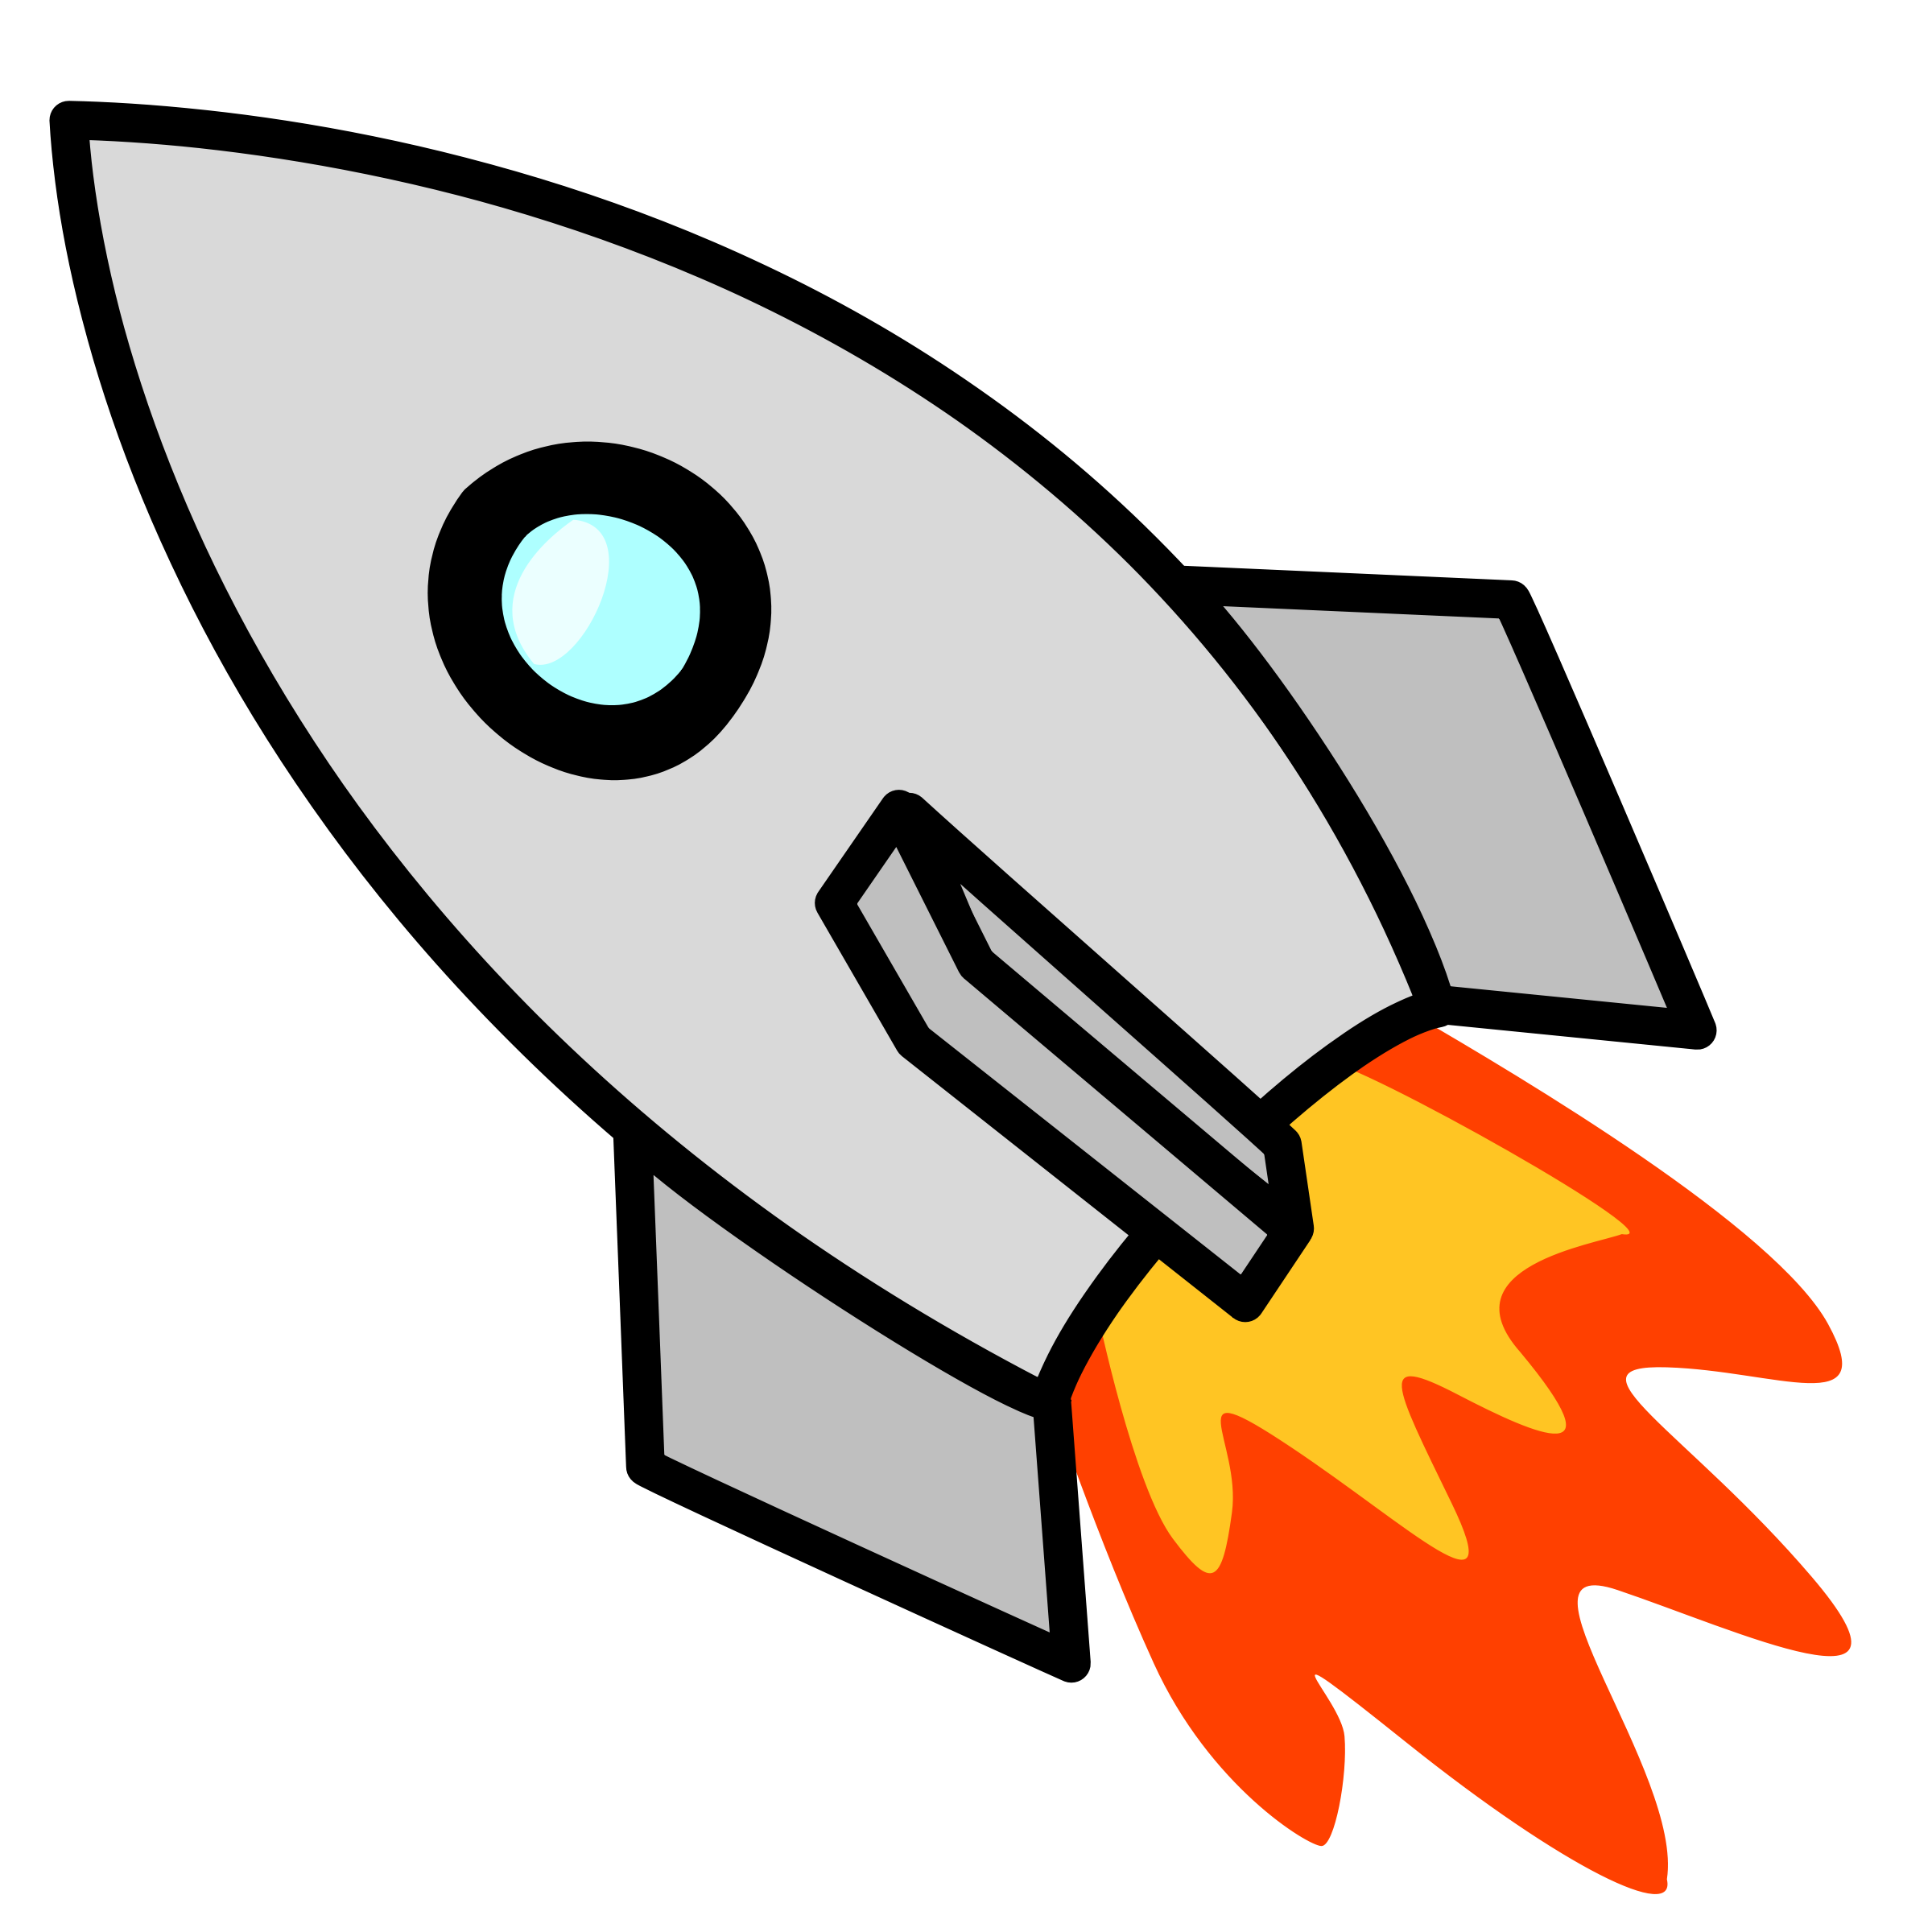 Clipart Of Rocket Ship Shapes - ClipArt Best